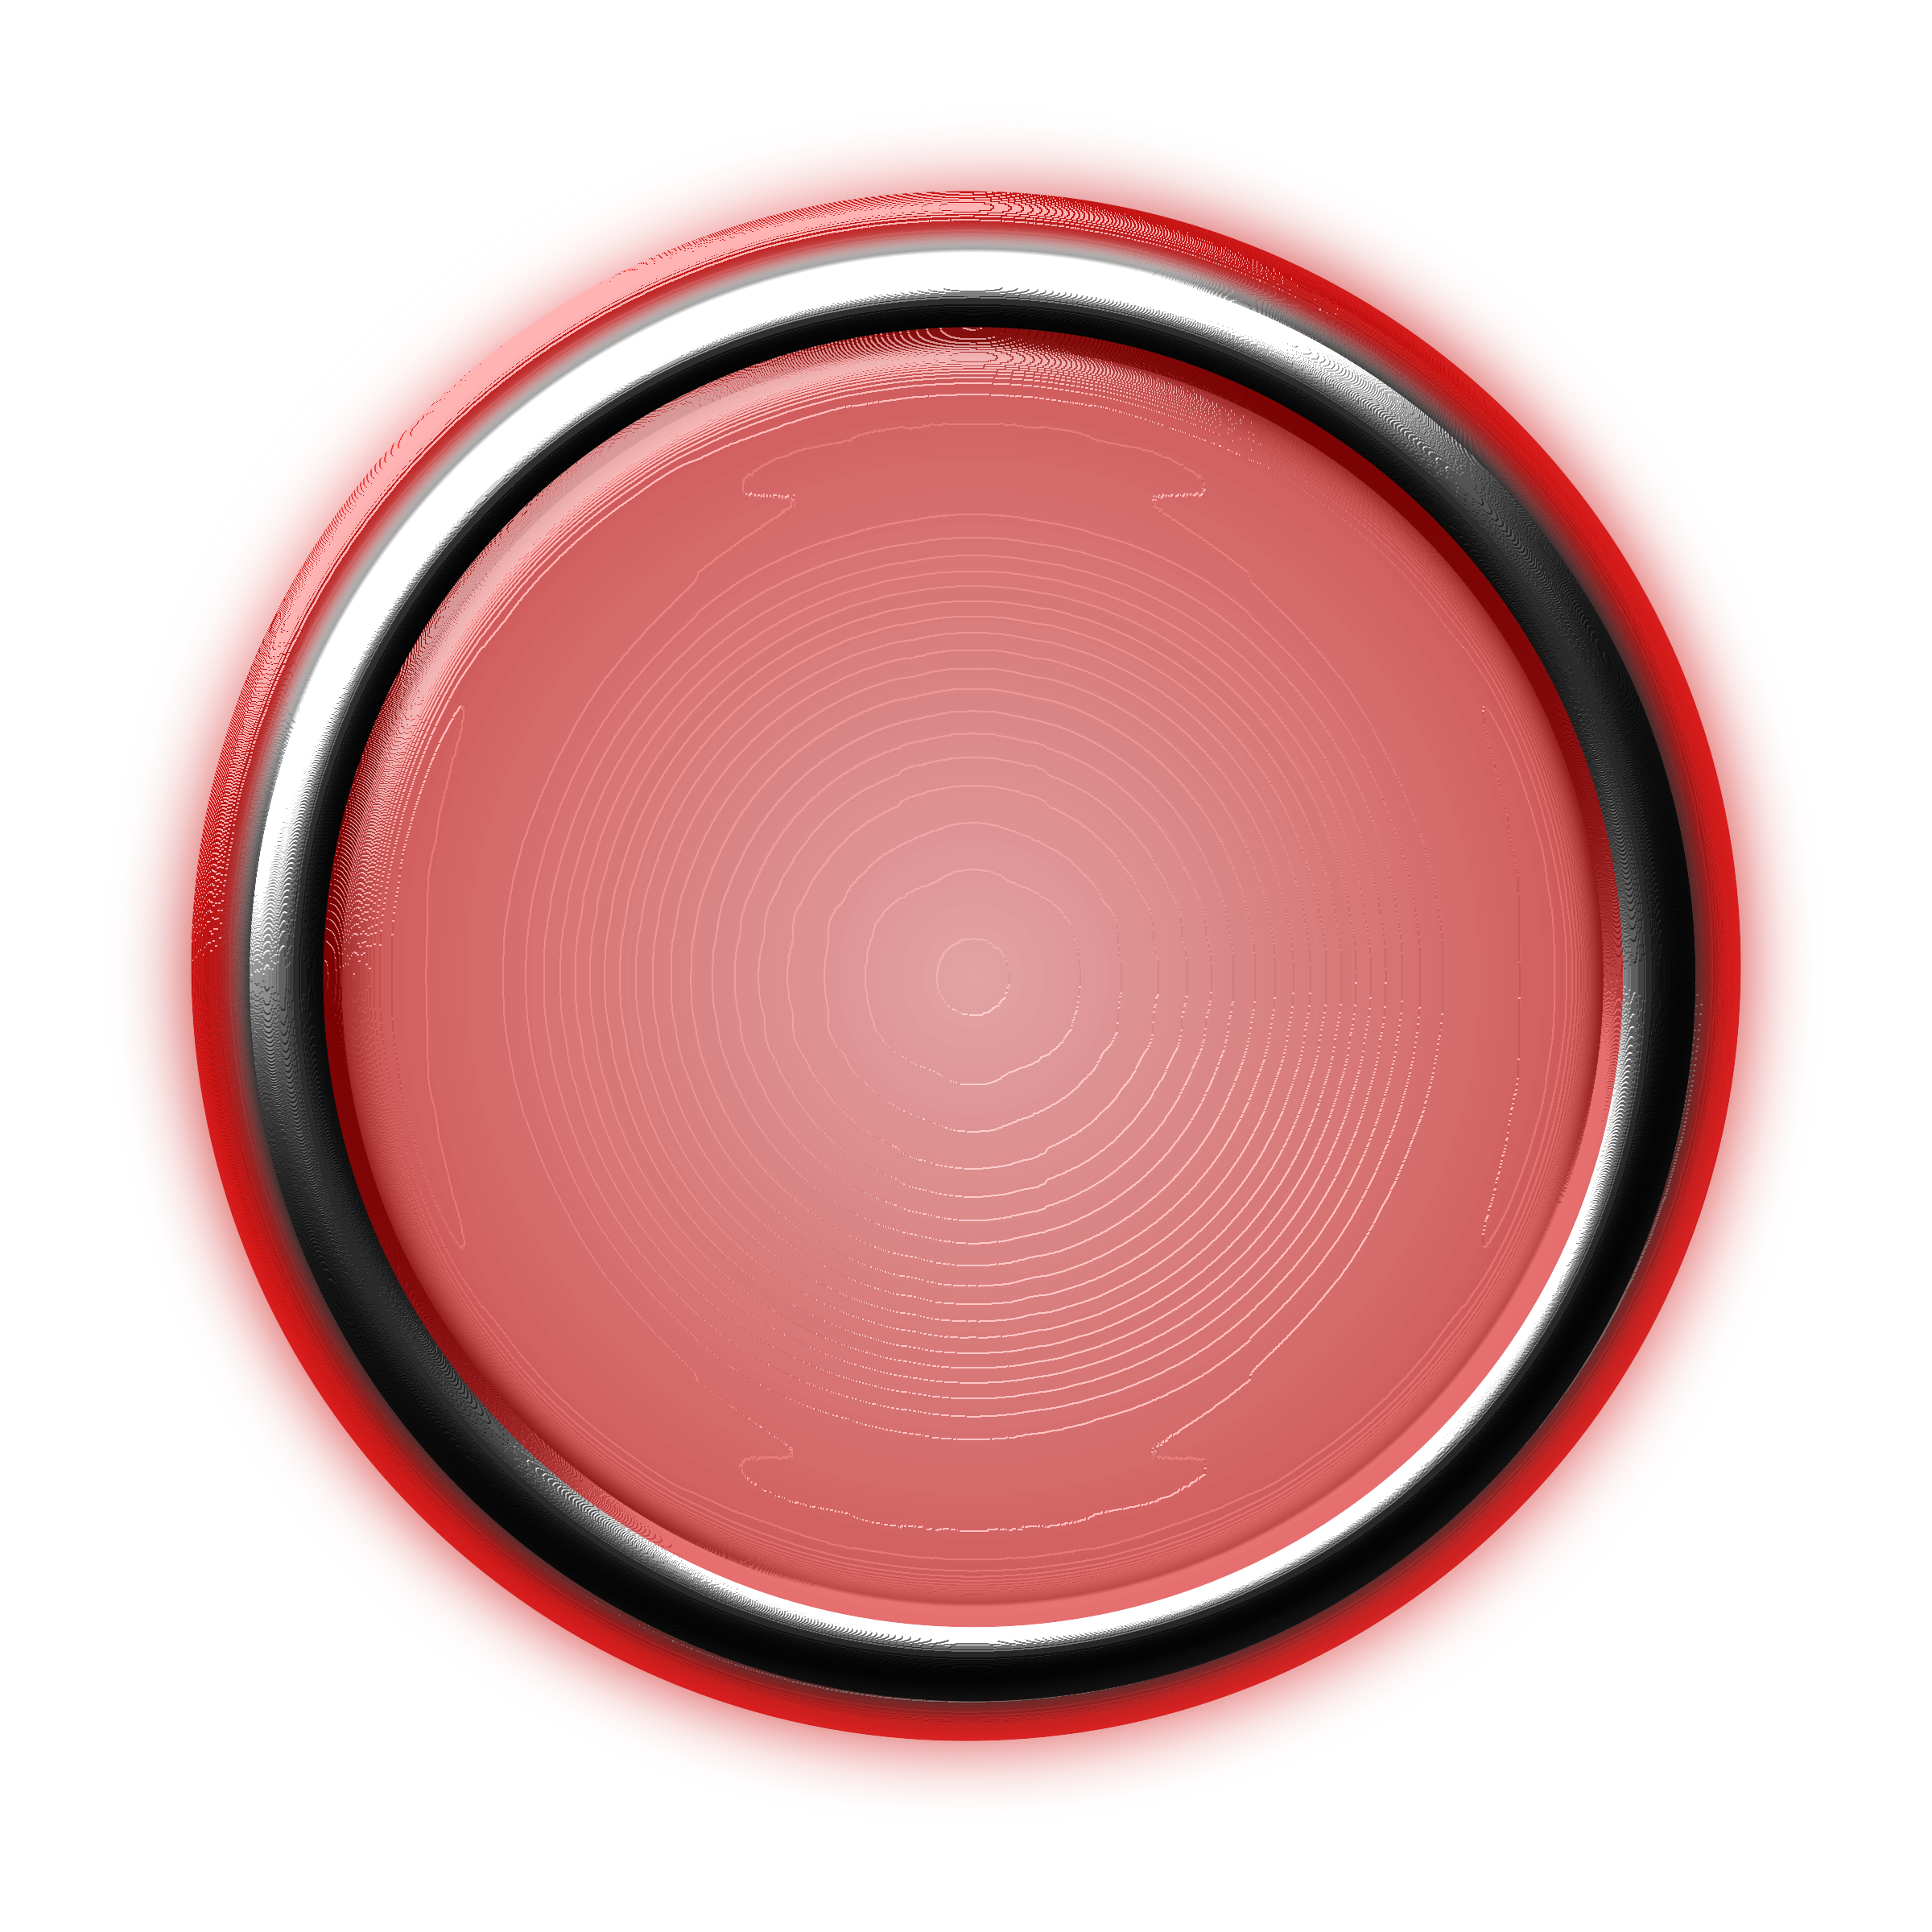 Red Button with Internal Light and Glowing Bezel SVG Clip arts